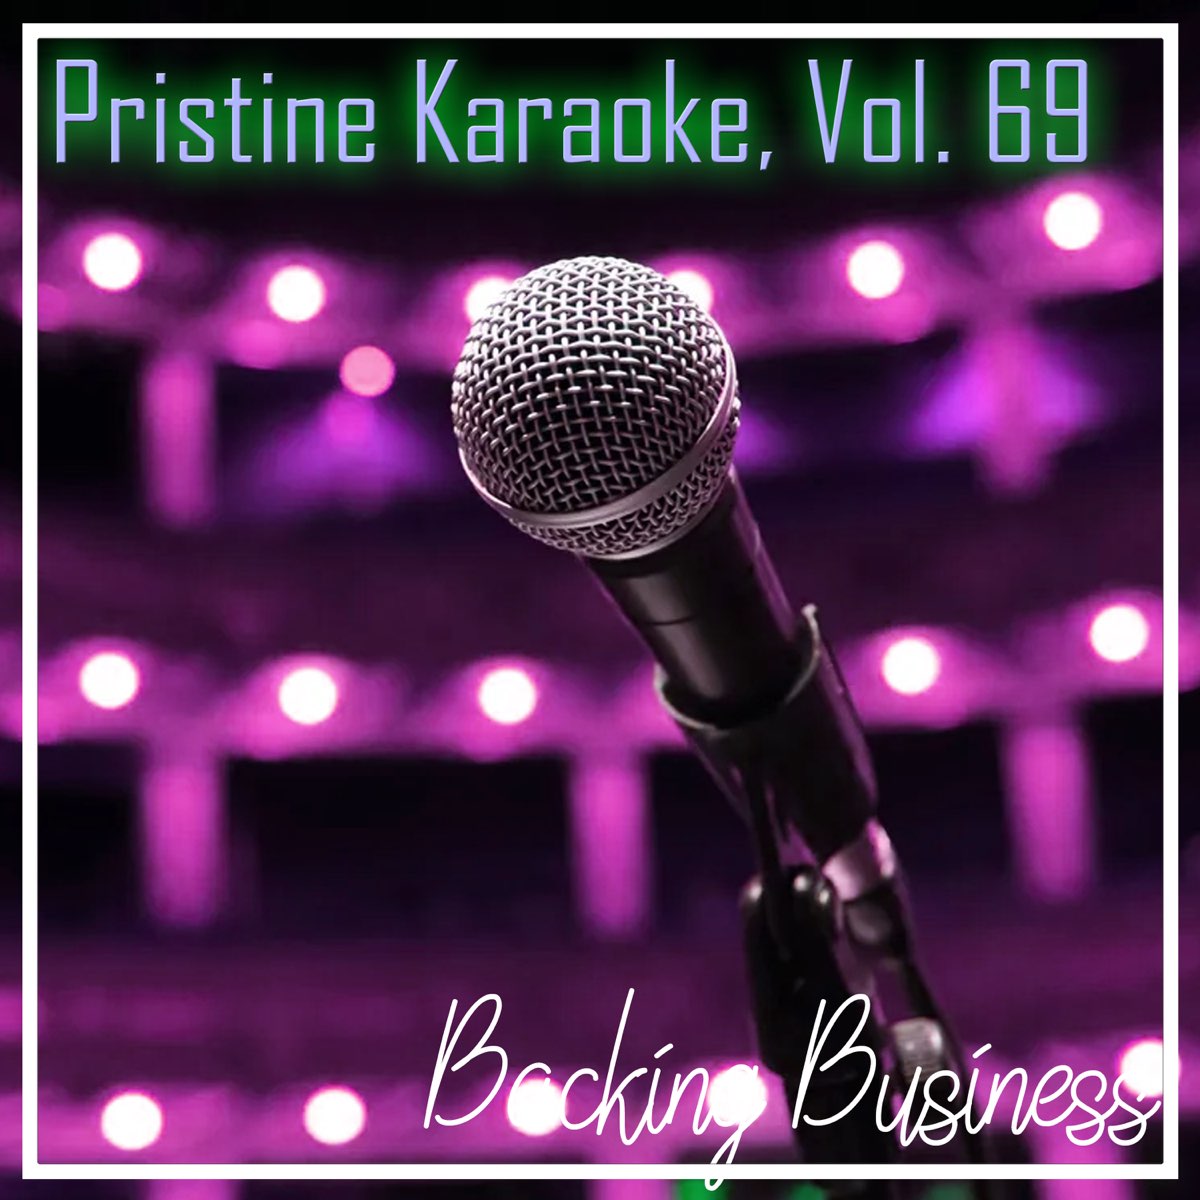 Pristine Karaoke, Vol. 69 by Backing Business on Apple Music